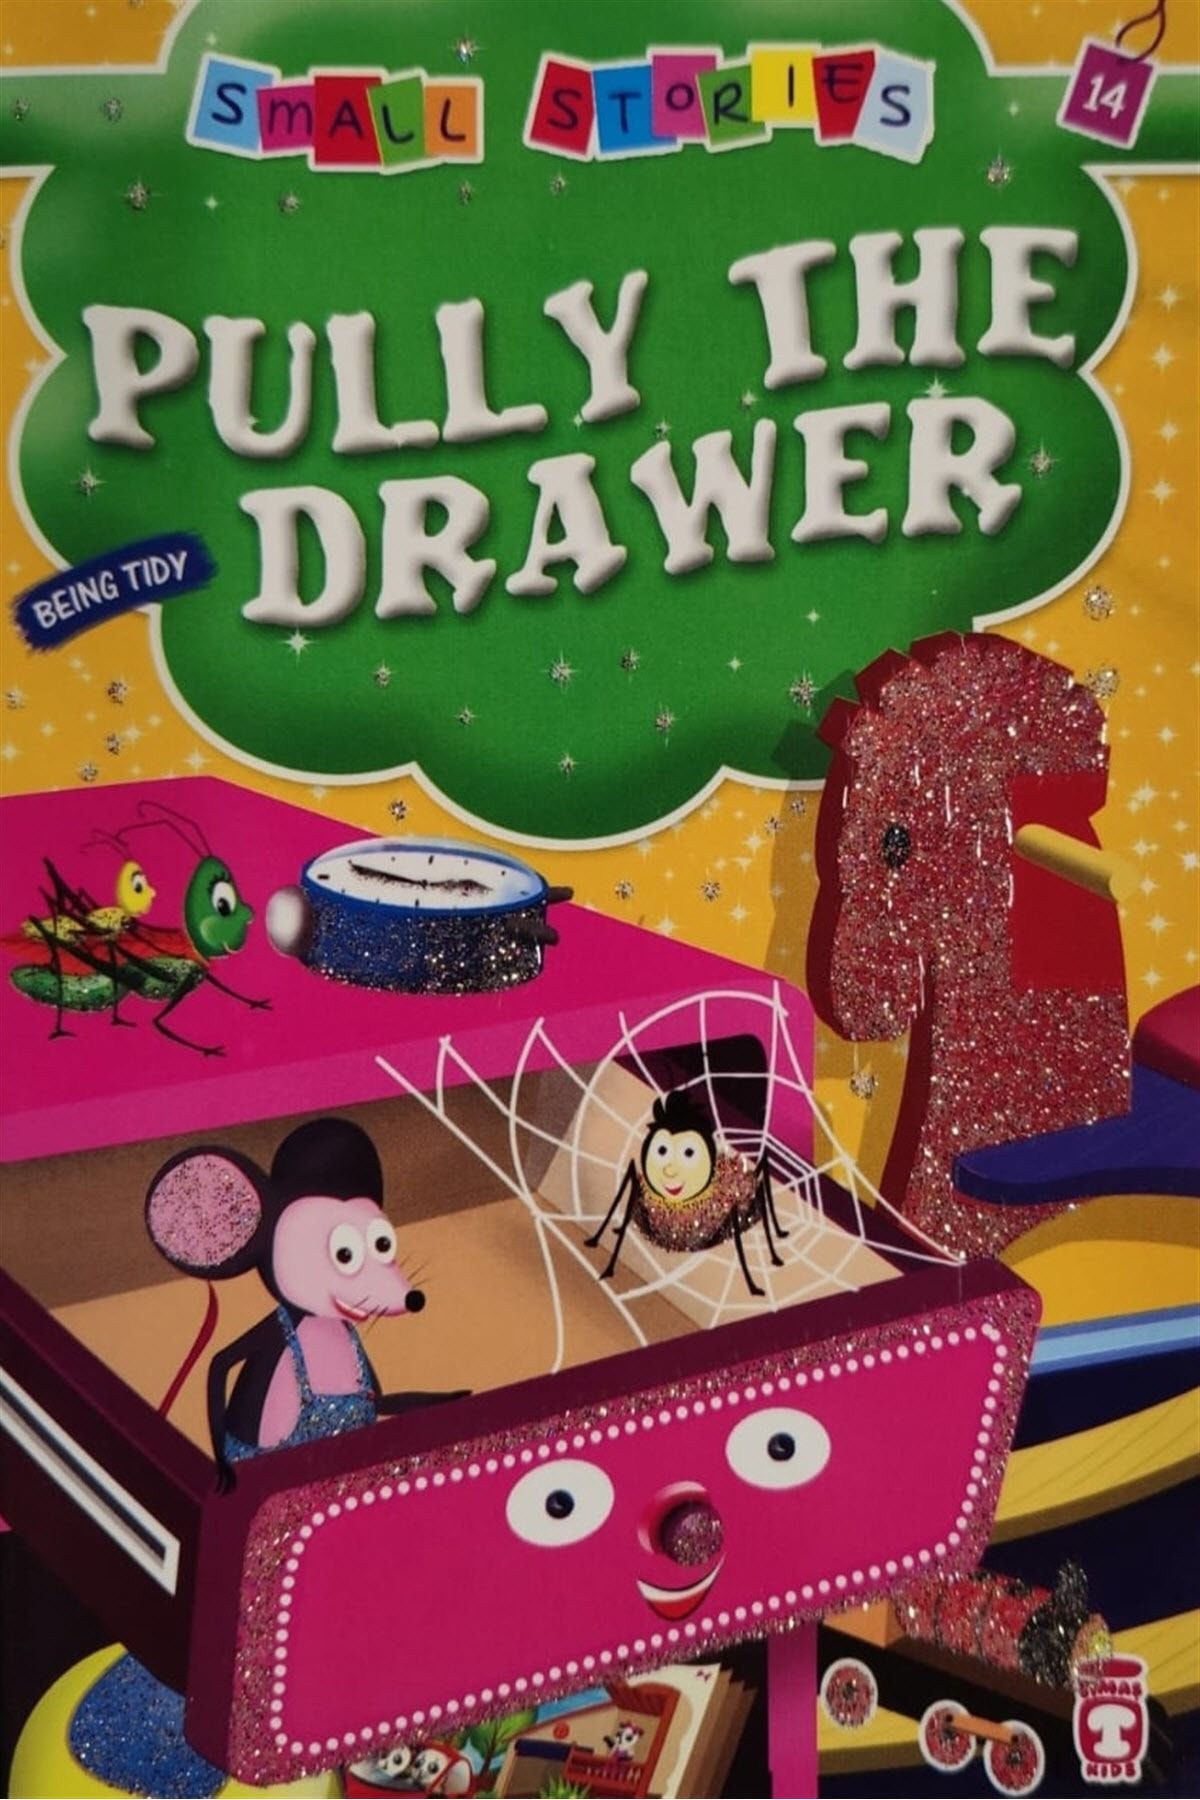 Timaş Publishing Pully The Drawer - Şokuh Gasemnia